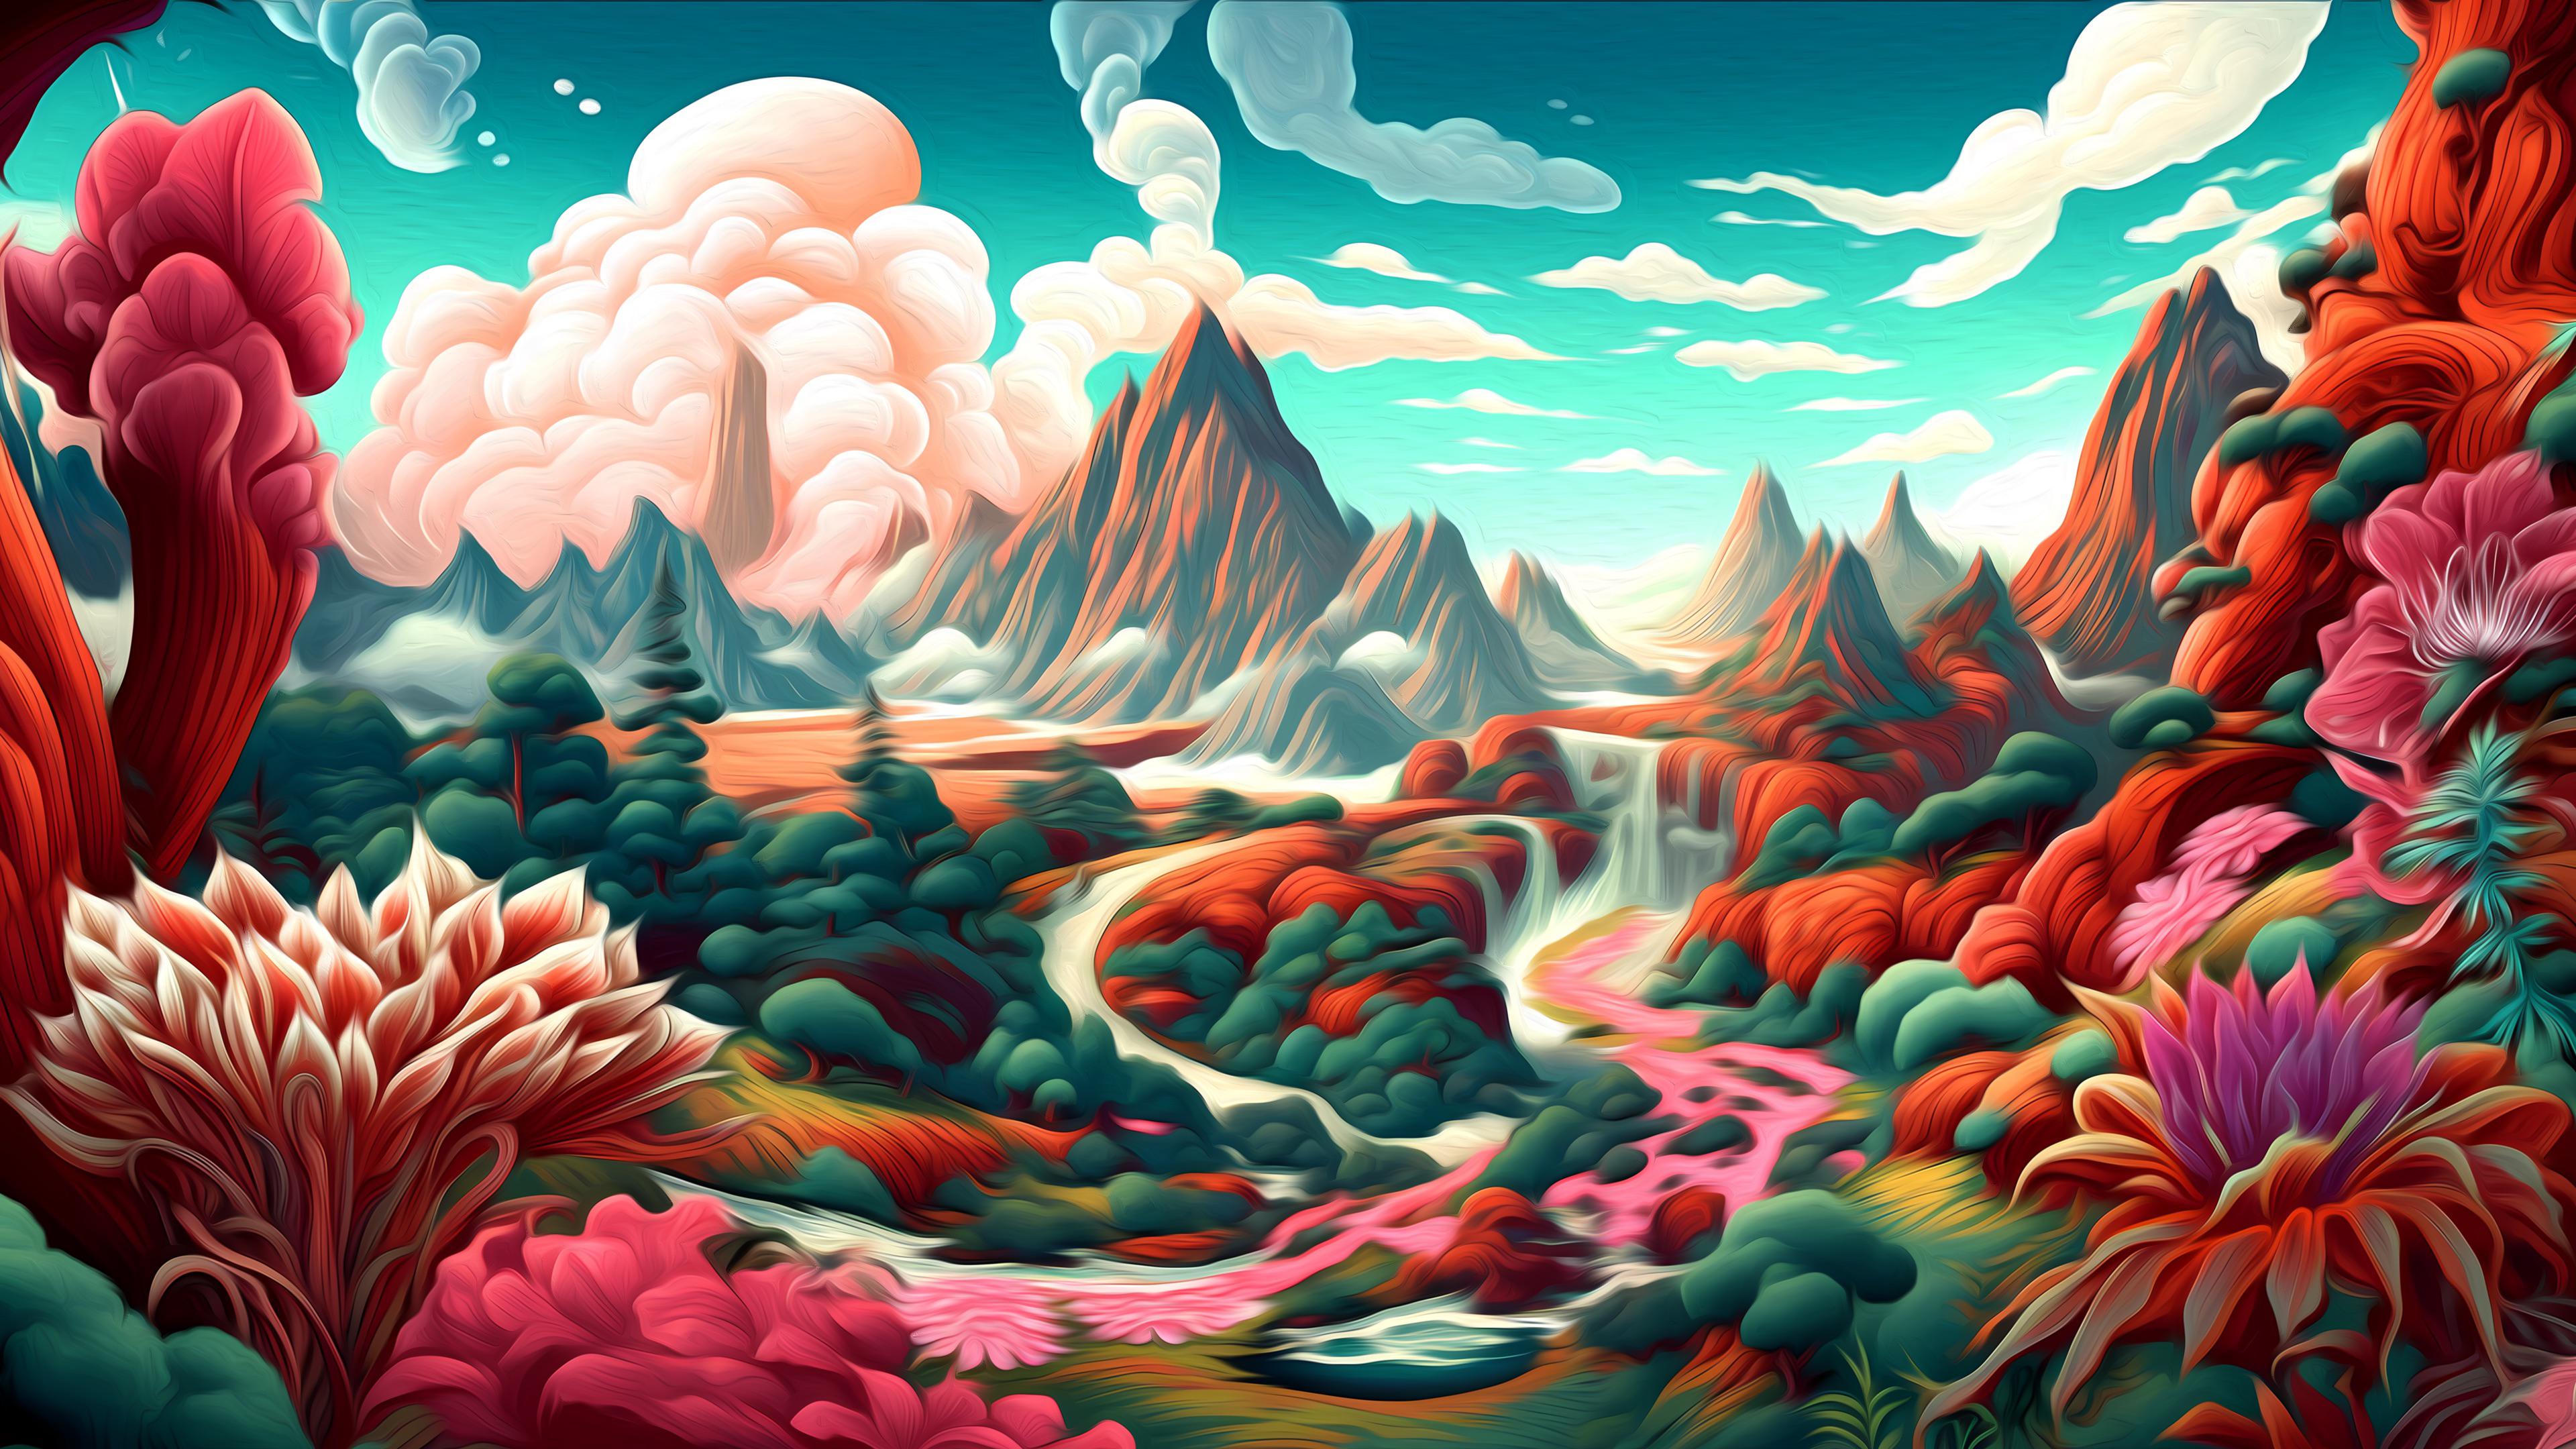 A colorful illustration of a mountain landscape with a waterfall and pink clouds. - 3840x2160, Windows 10, landscape, mountain